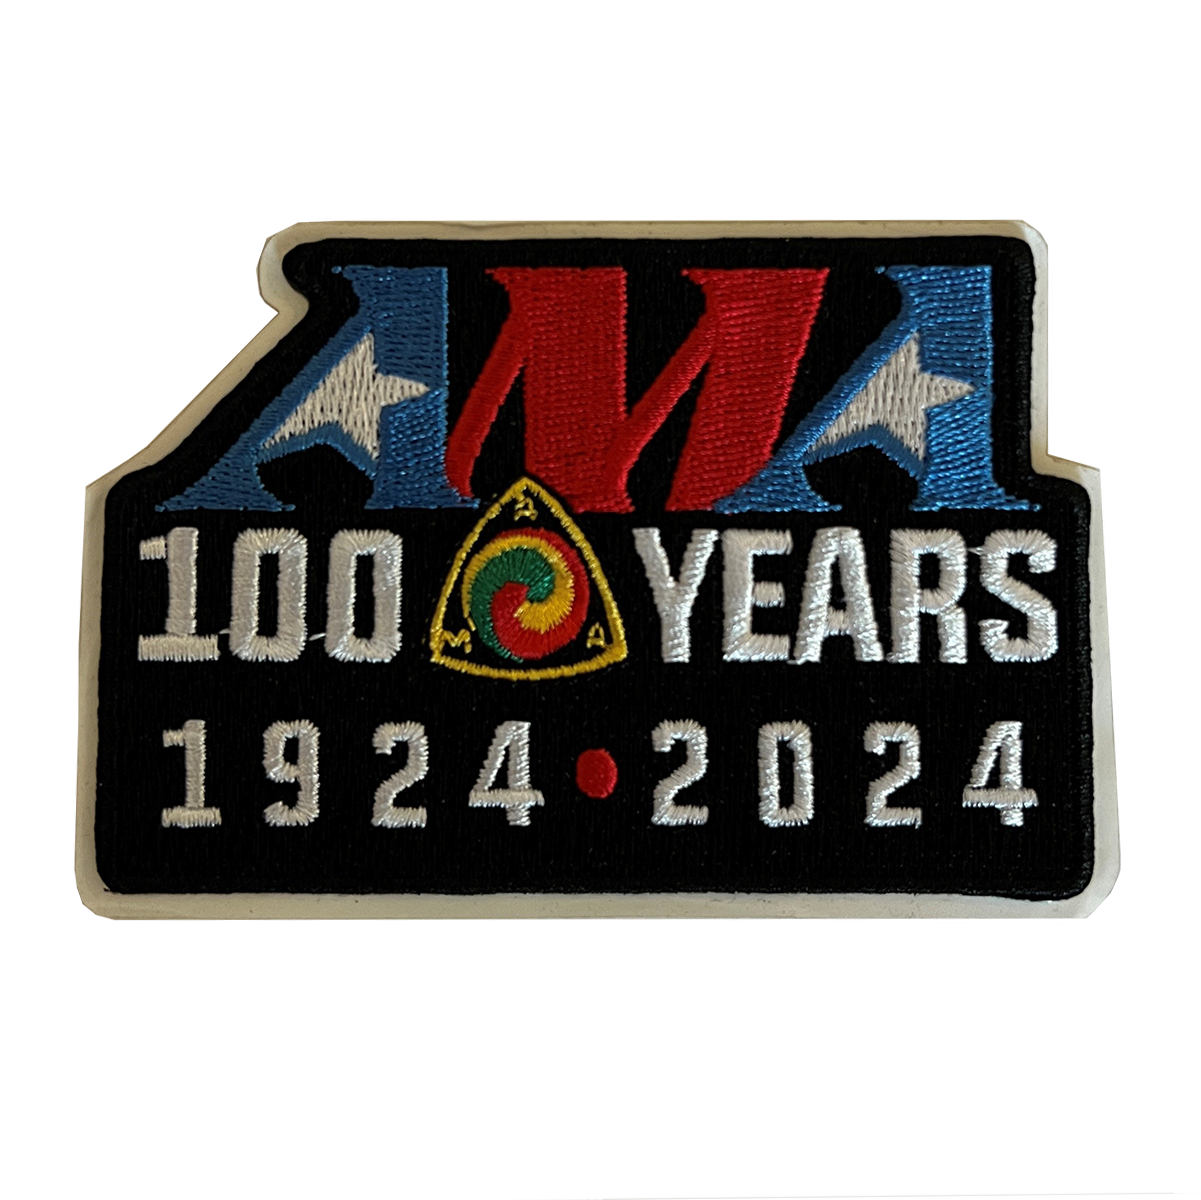 AMA 100 Years Black Patch on peel-off paper